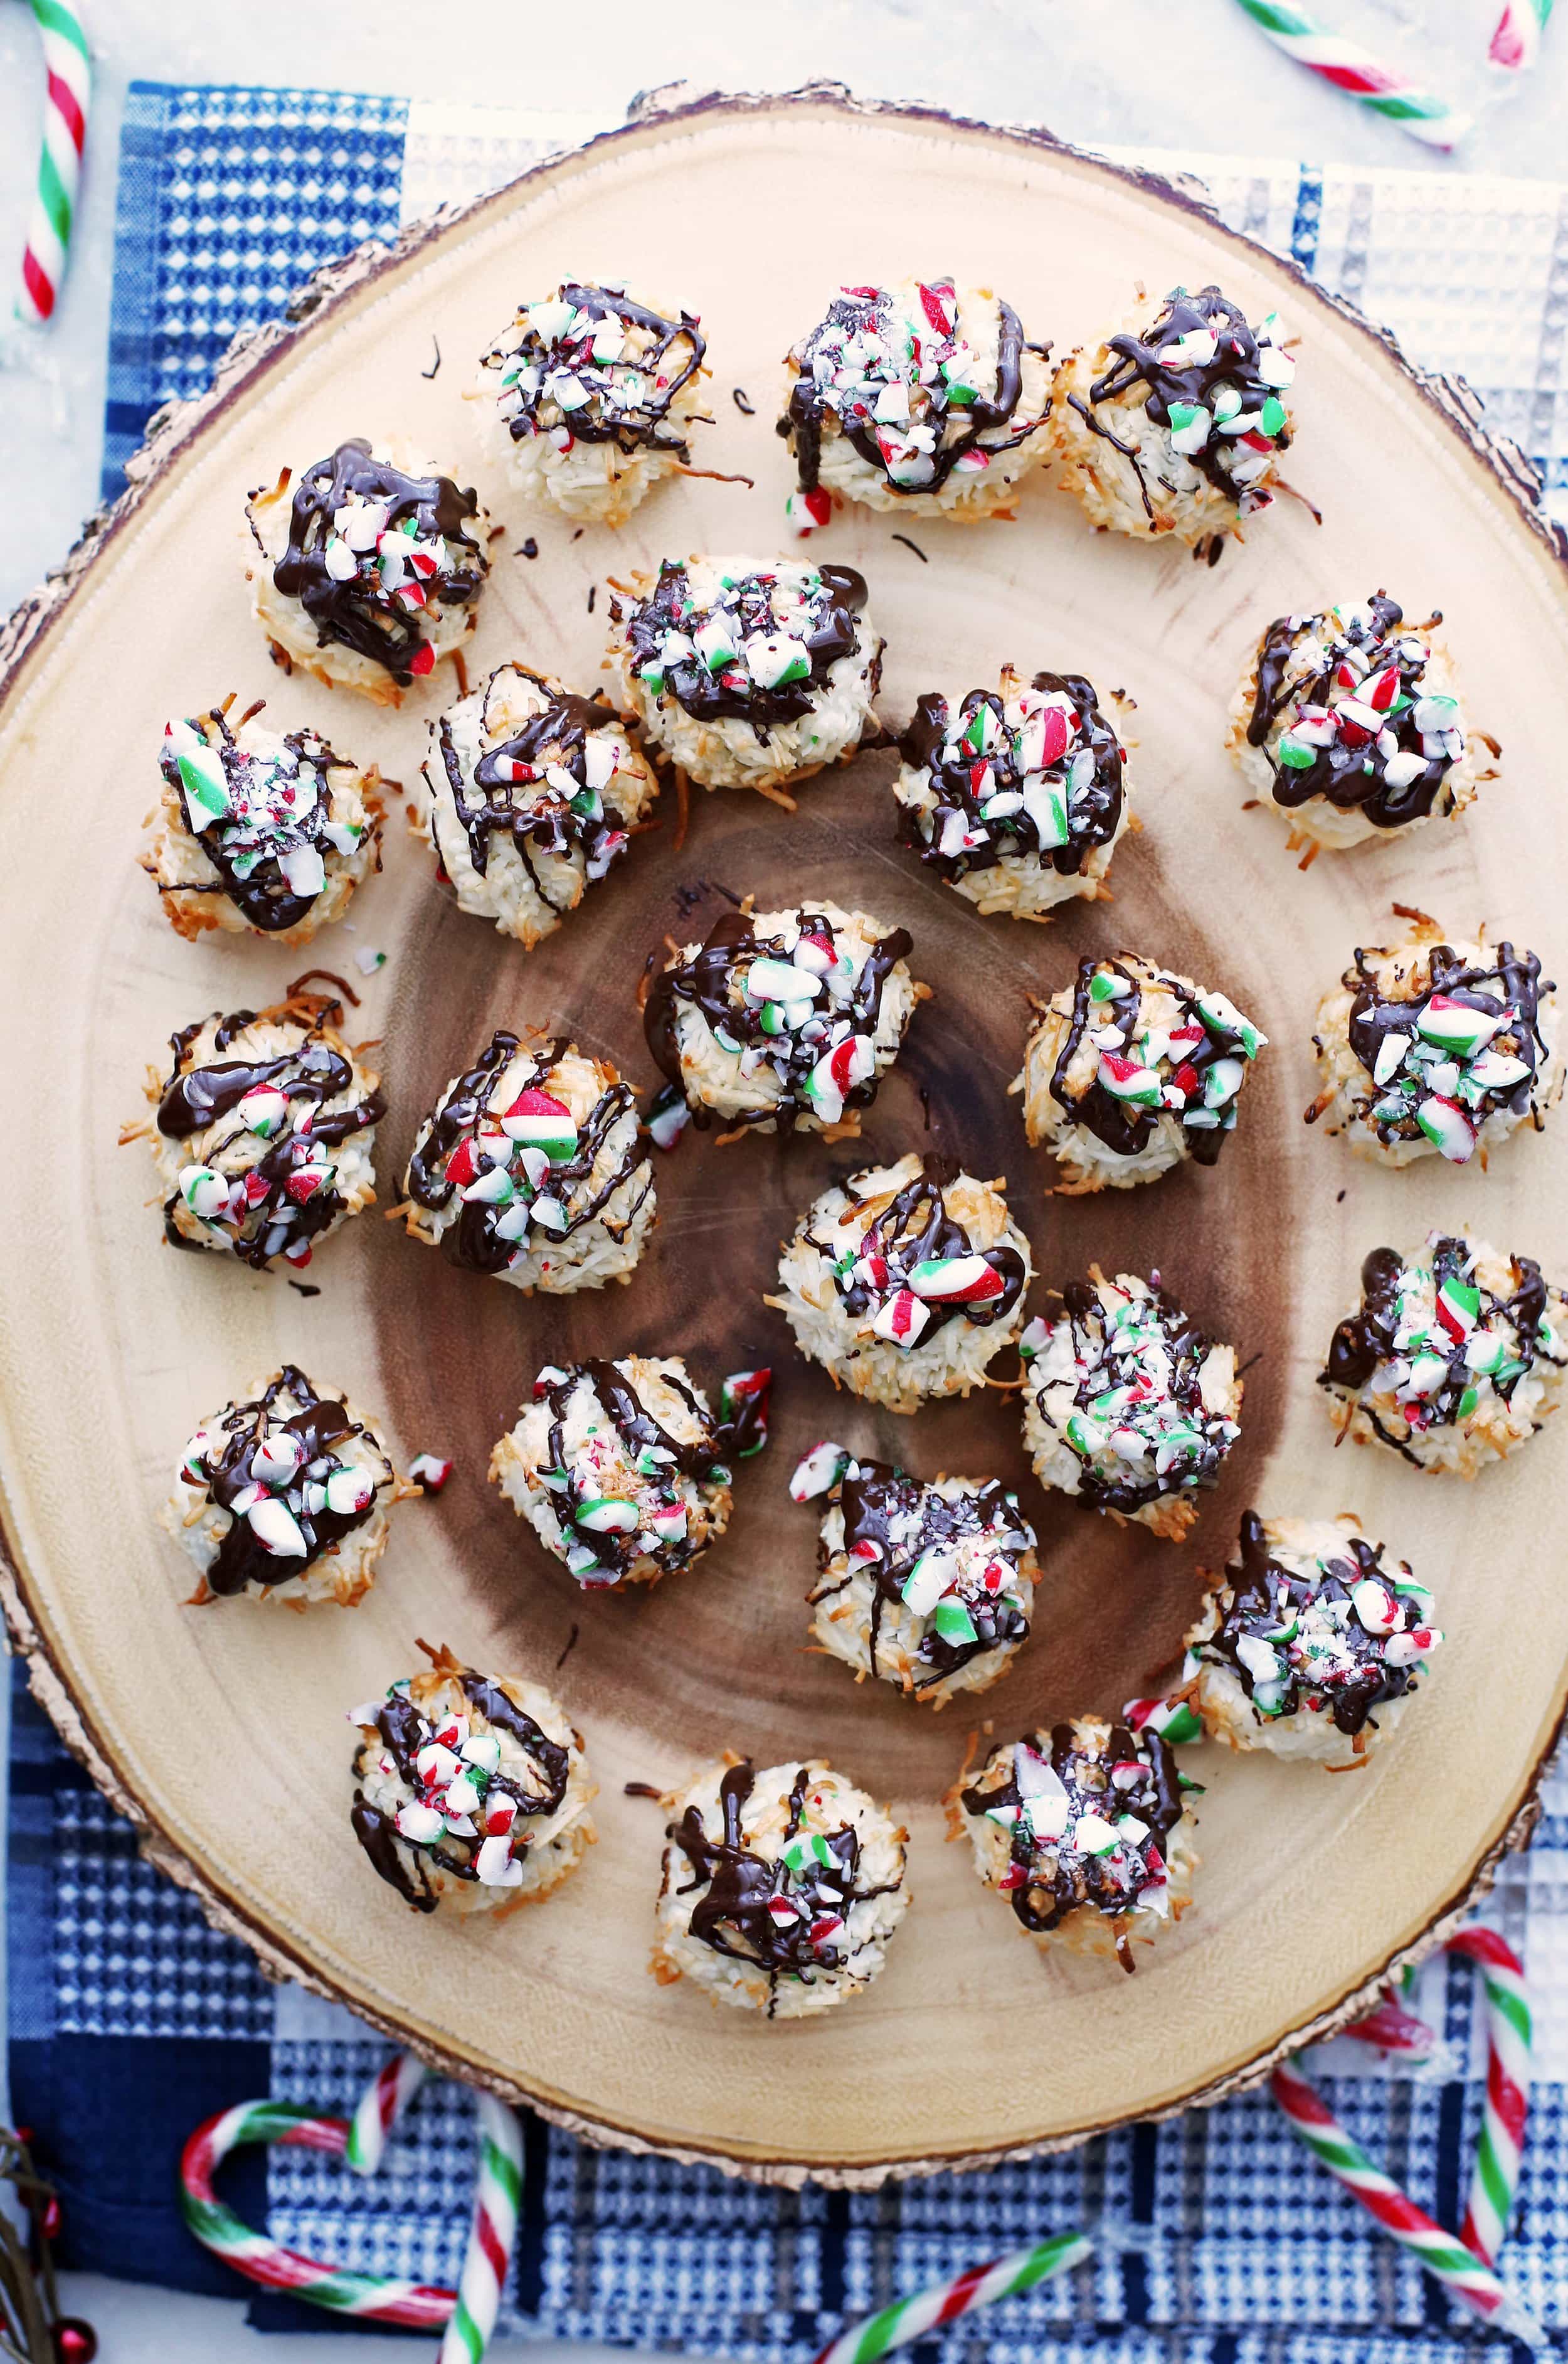 Coconut macaroons topped with melted chocolate and crushed candy canes on a wooden platter.